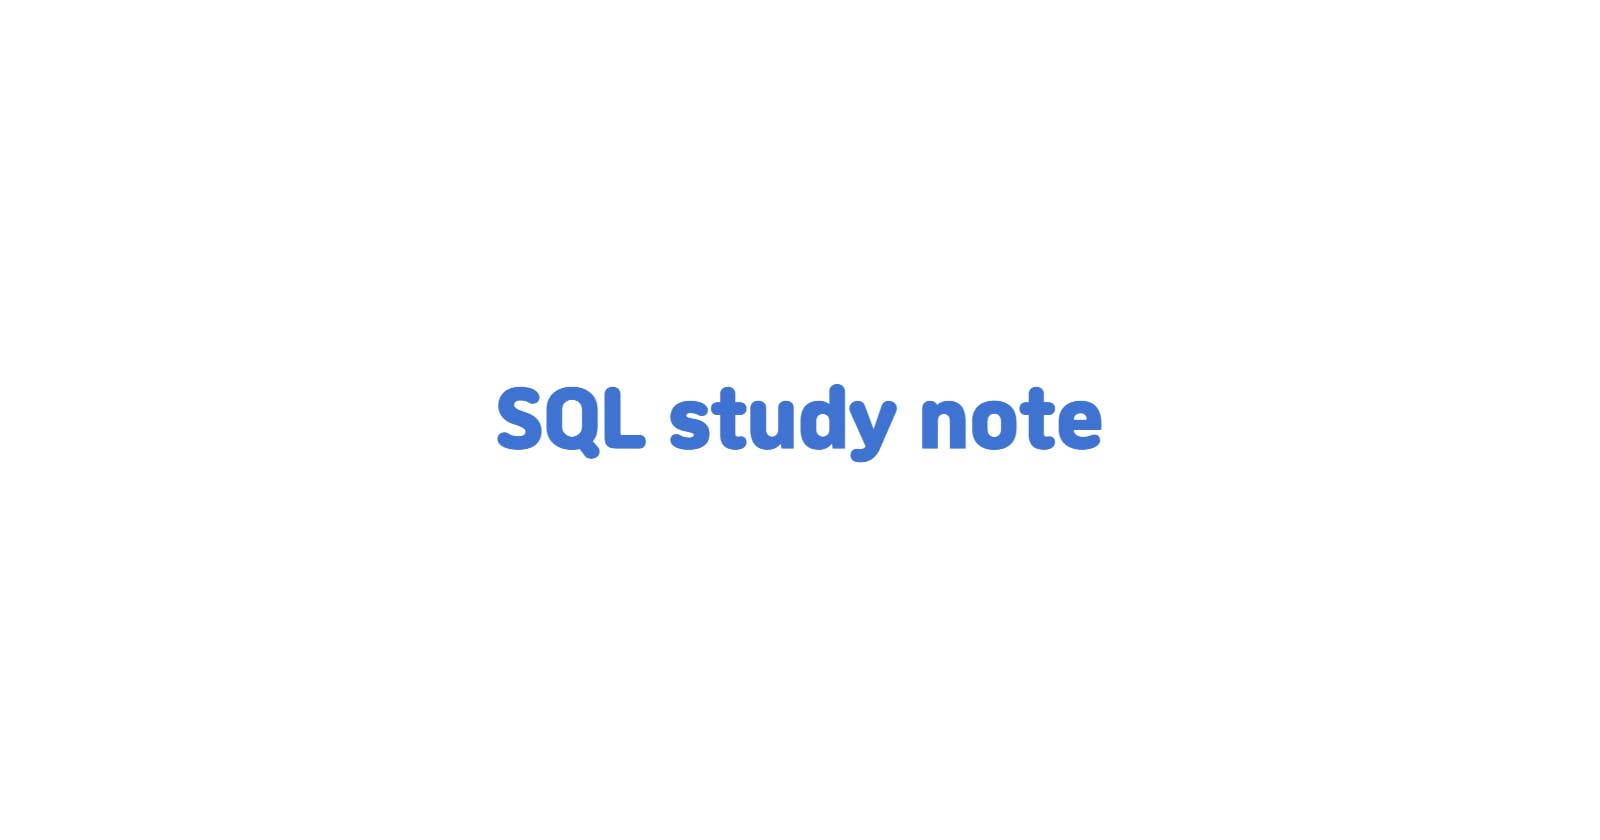 [sql study note] replace, substring, concat, if, case, cast